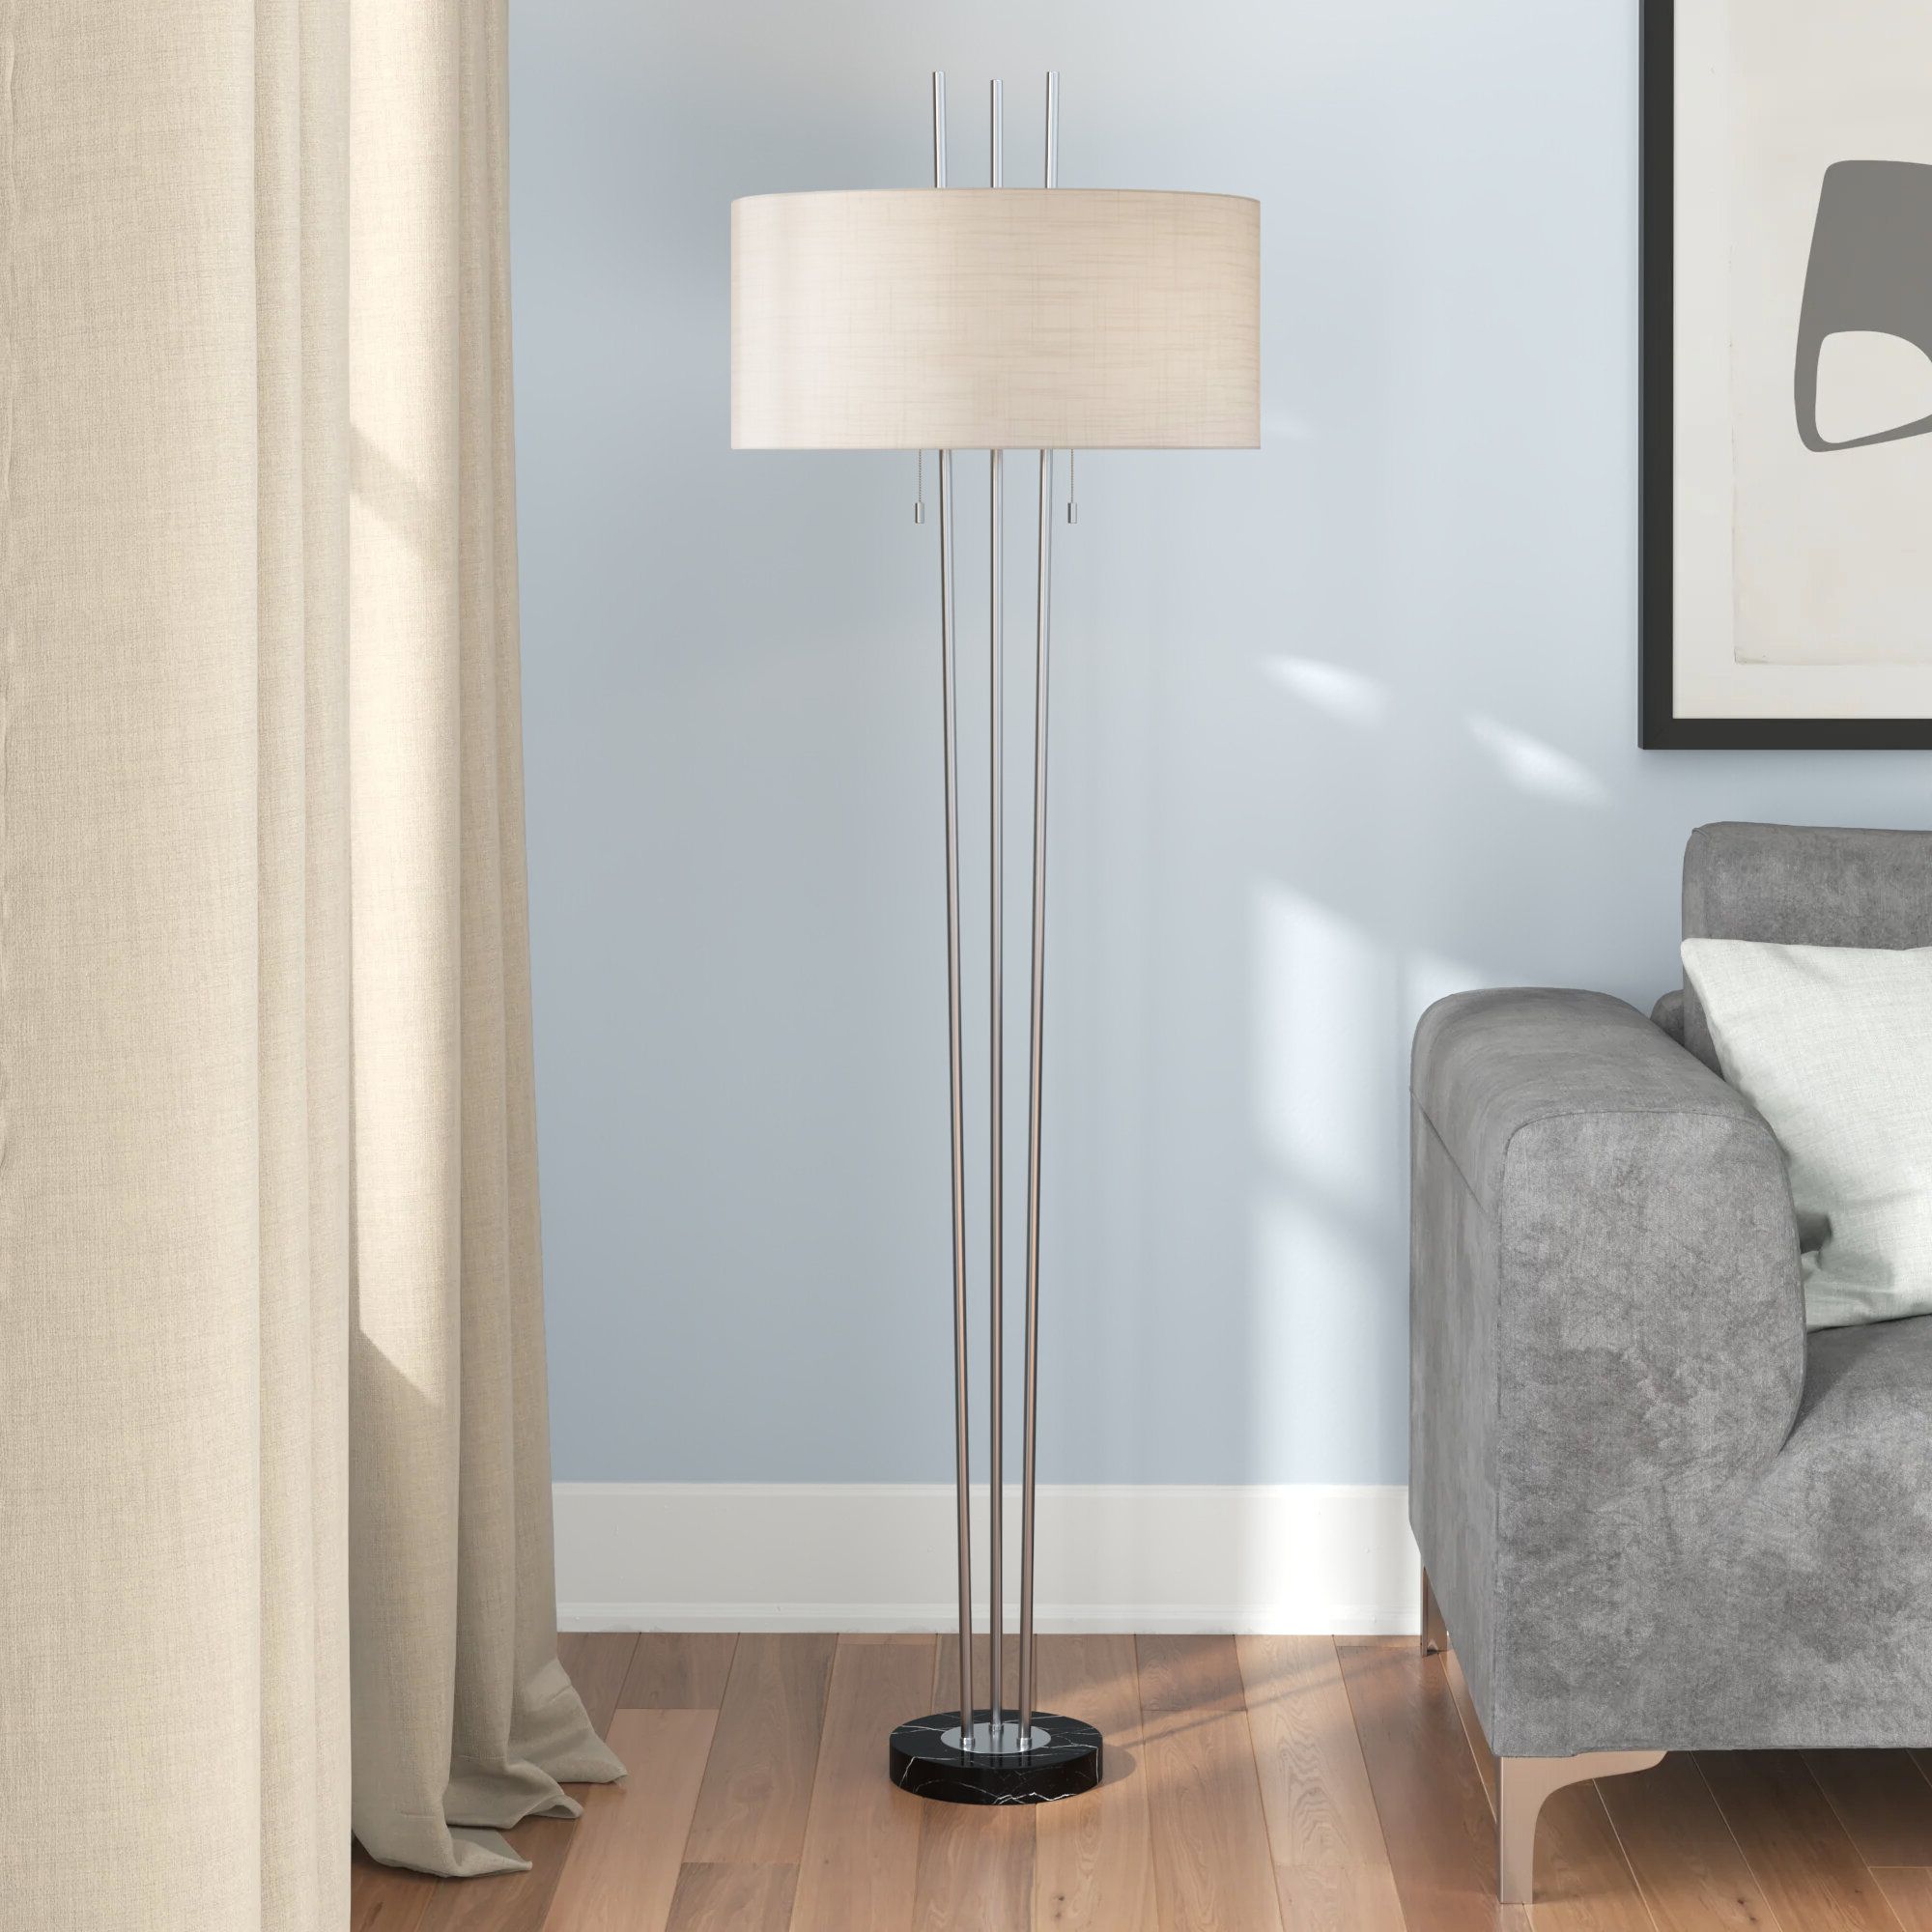 Wayfair Pertaining To Textured Fabric Standing Lamps (View 6 of 10)